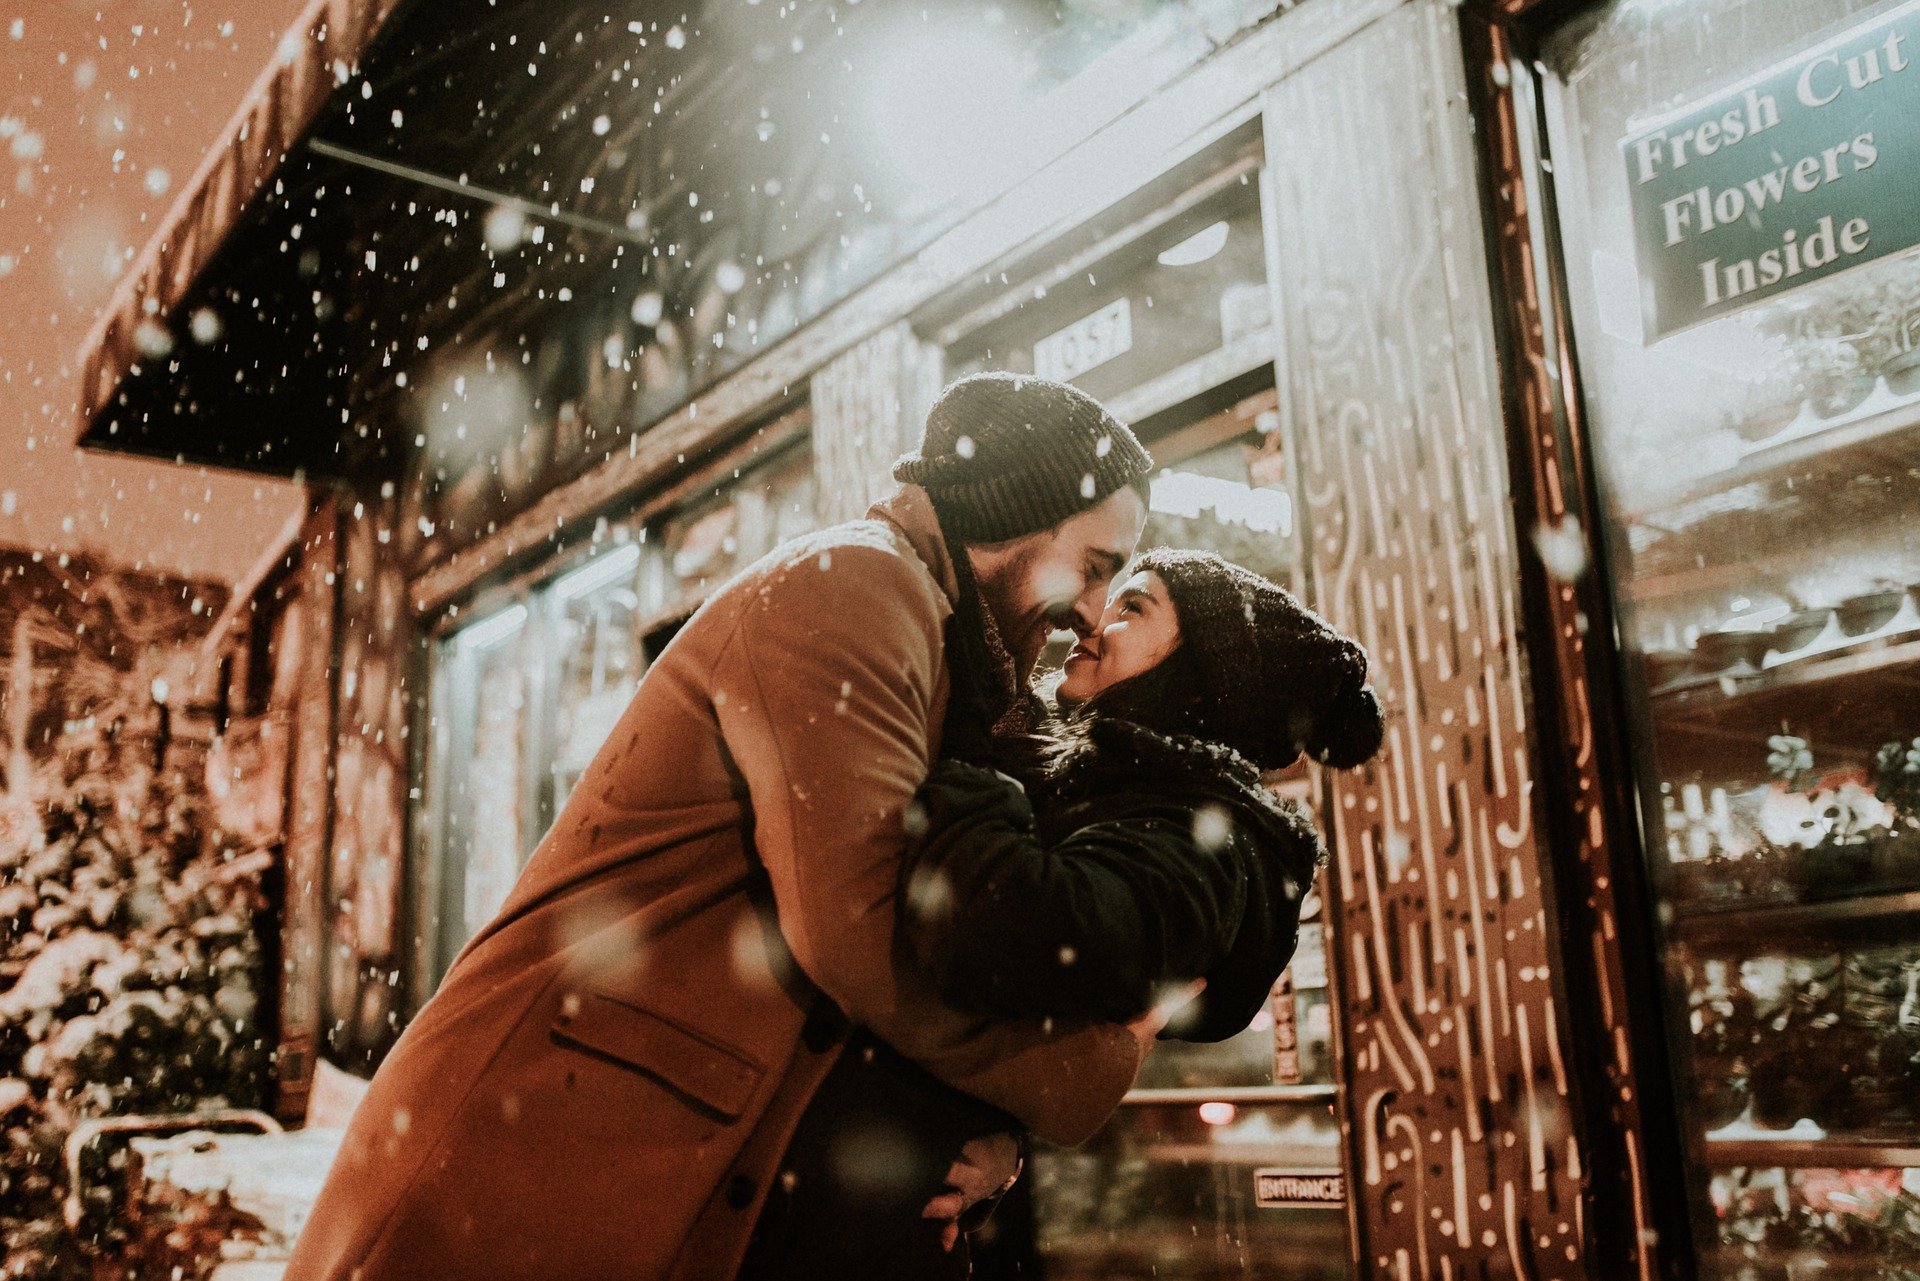 A couple embracing outside a flower shop while it snows | Photo: Pixabay/StockSnap